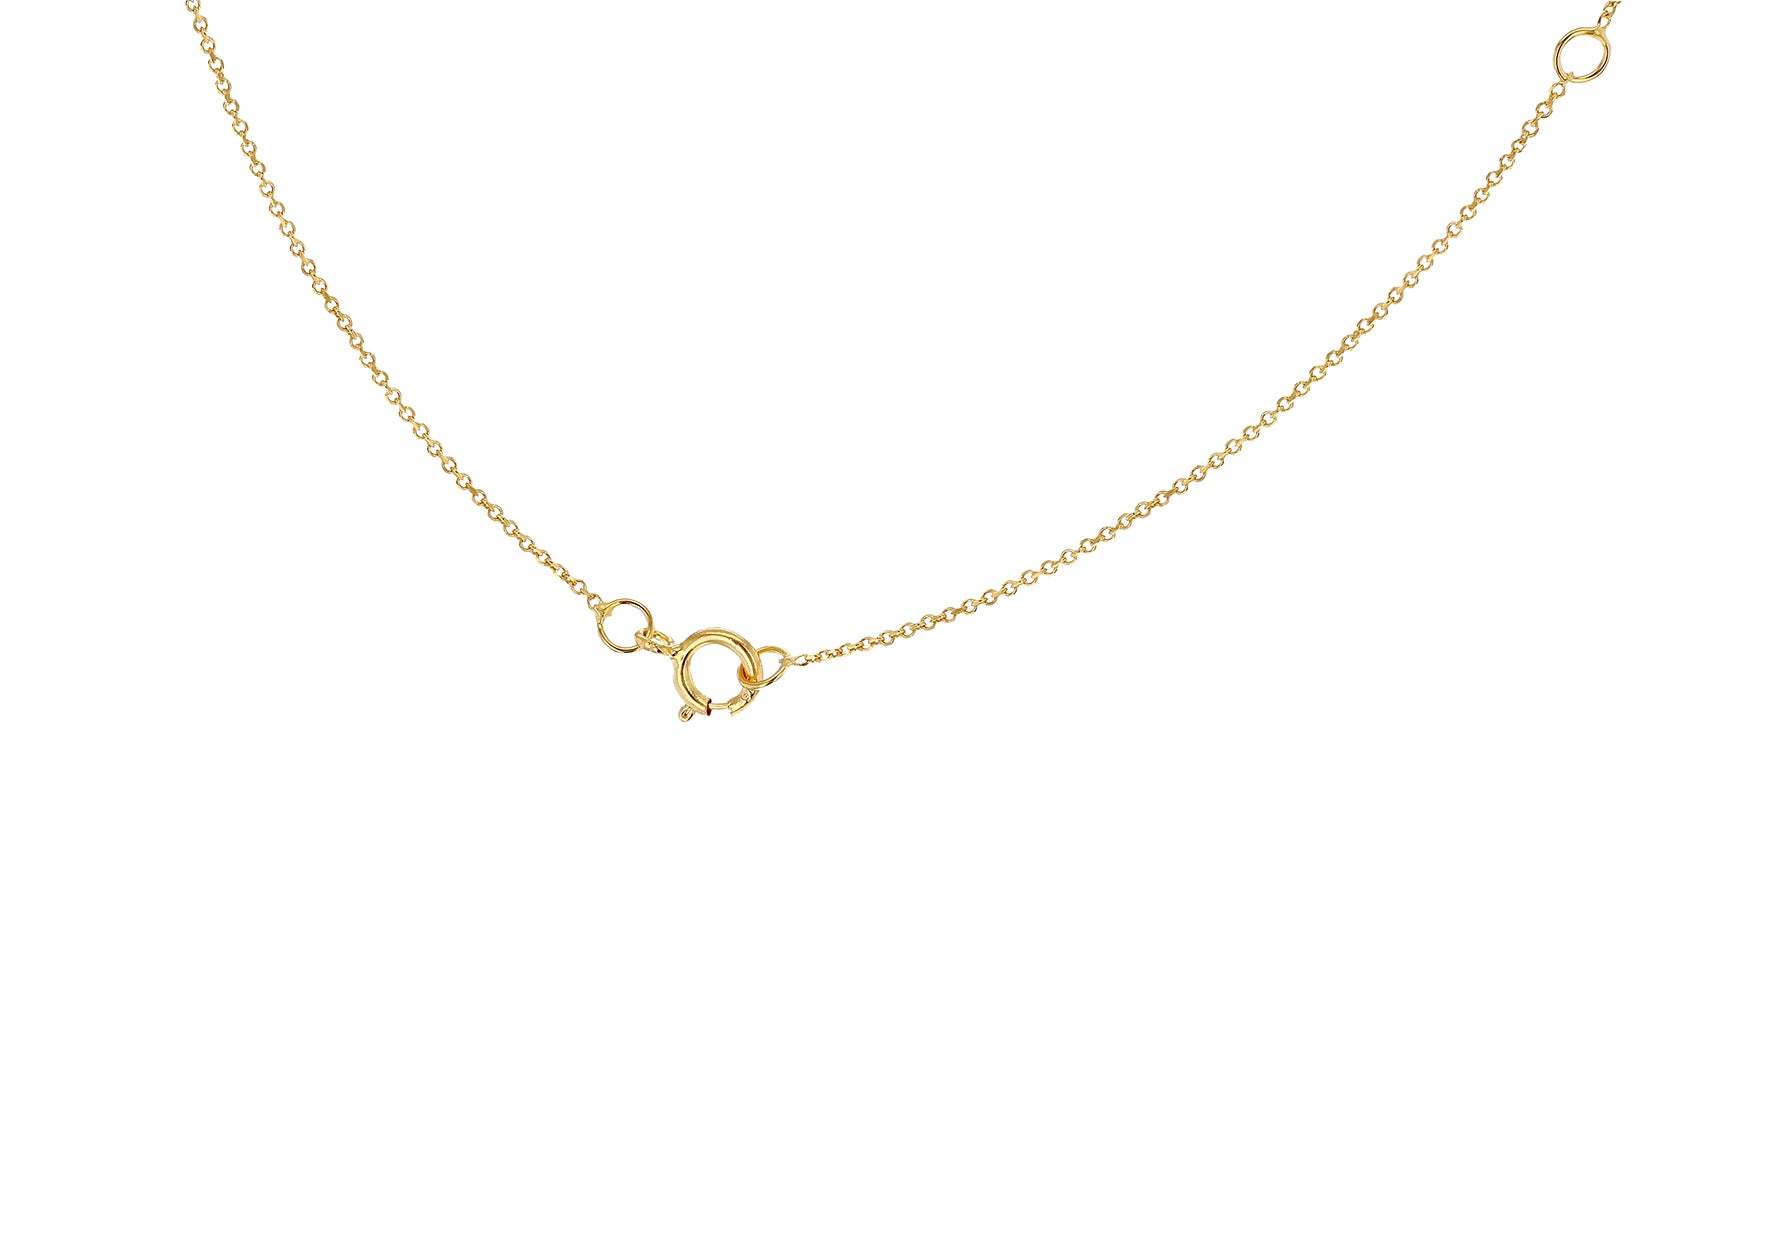 9ct Yellow Gold Plain Single Initial S Necklace